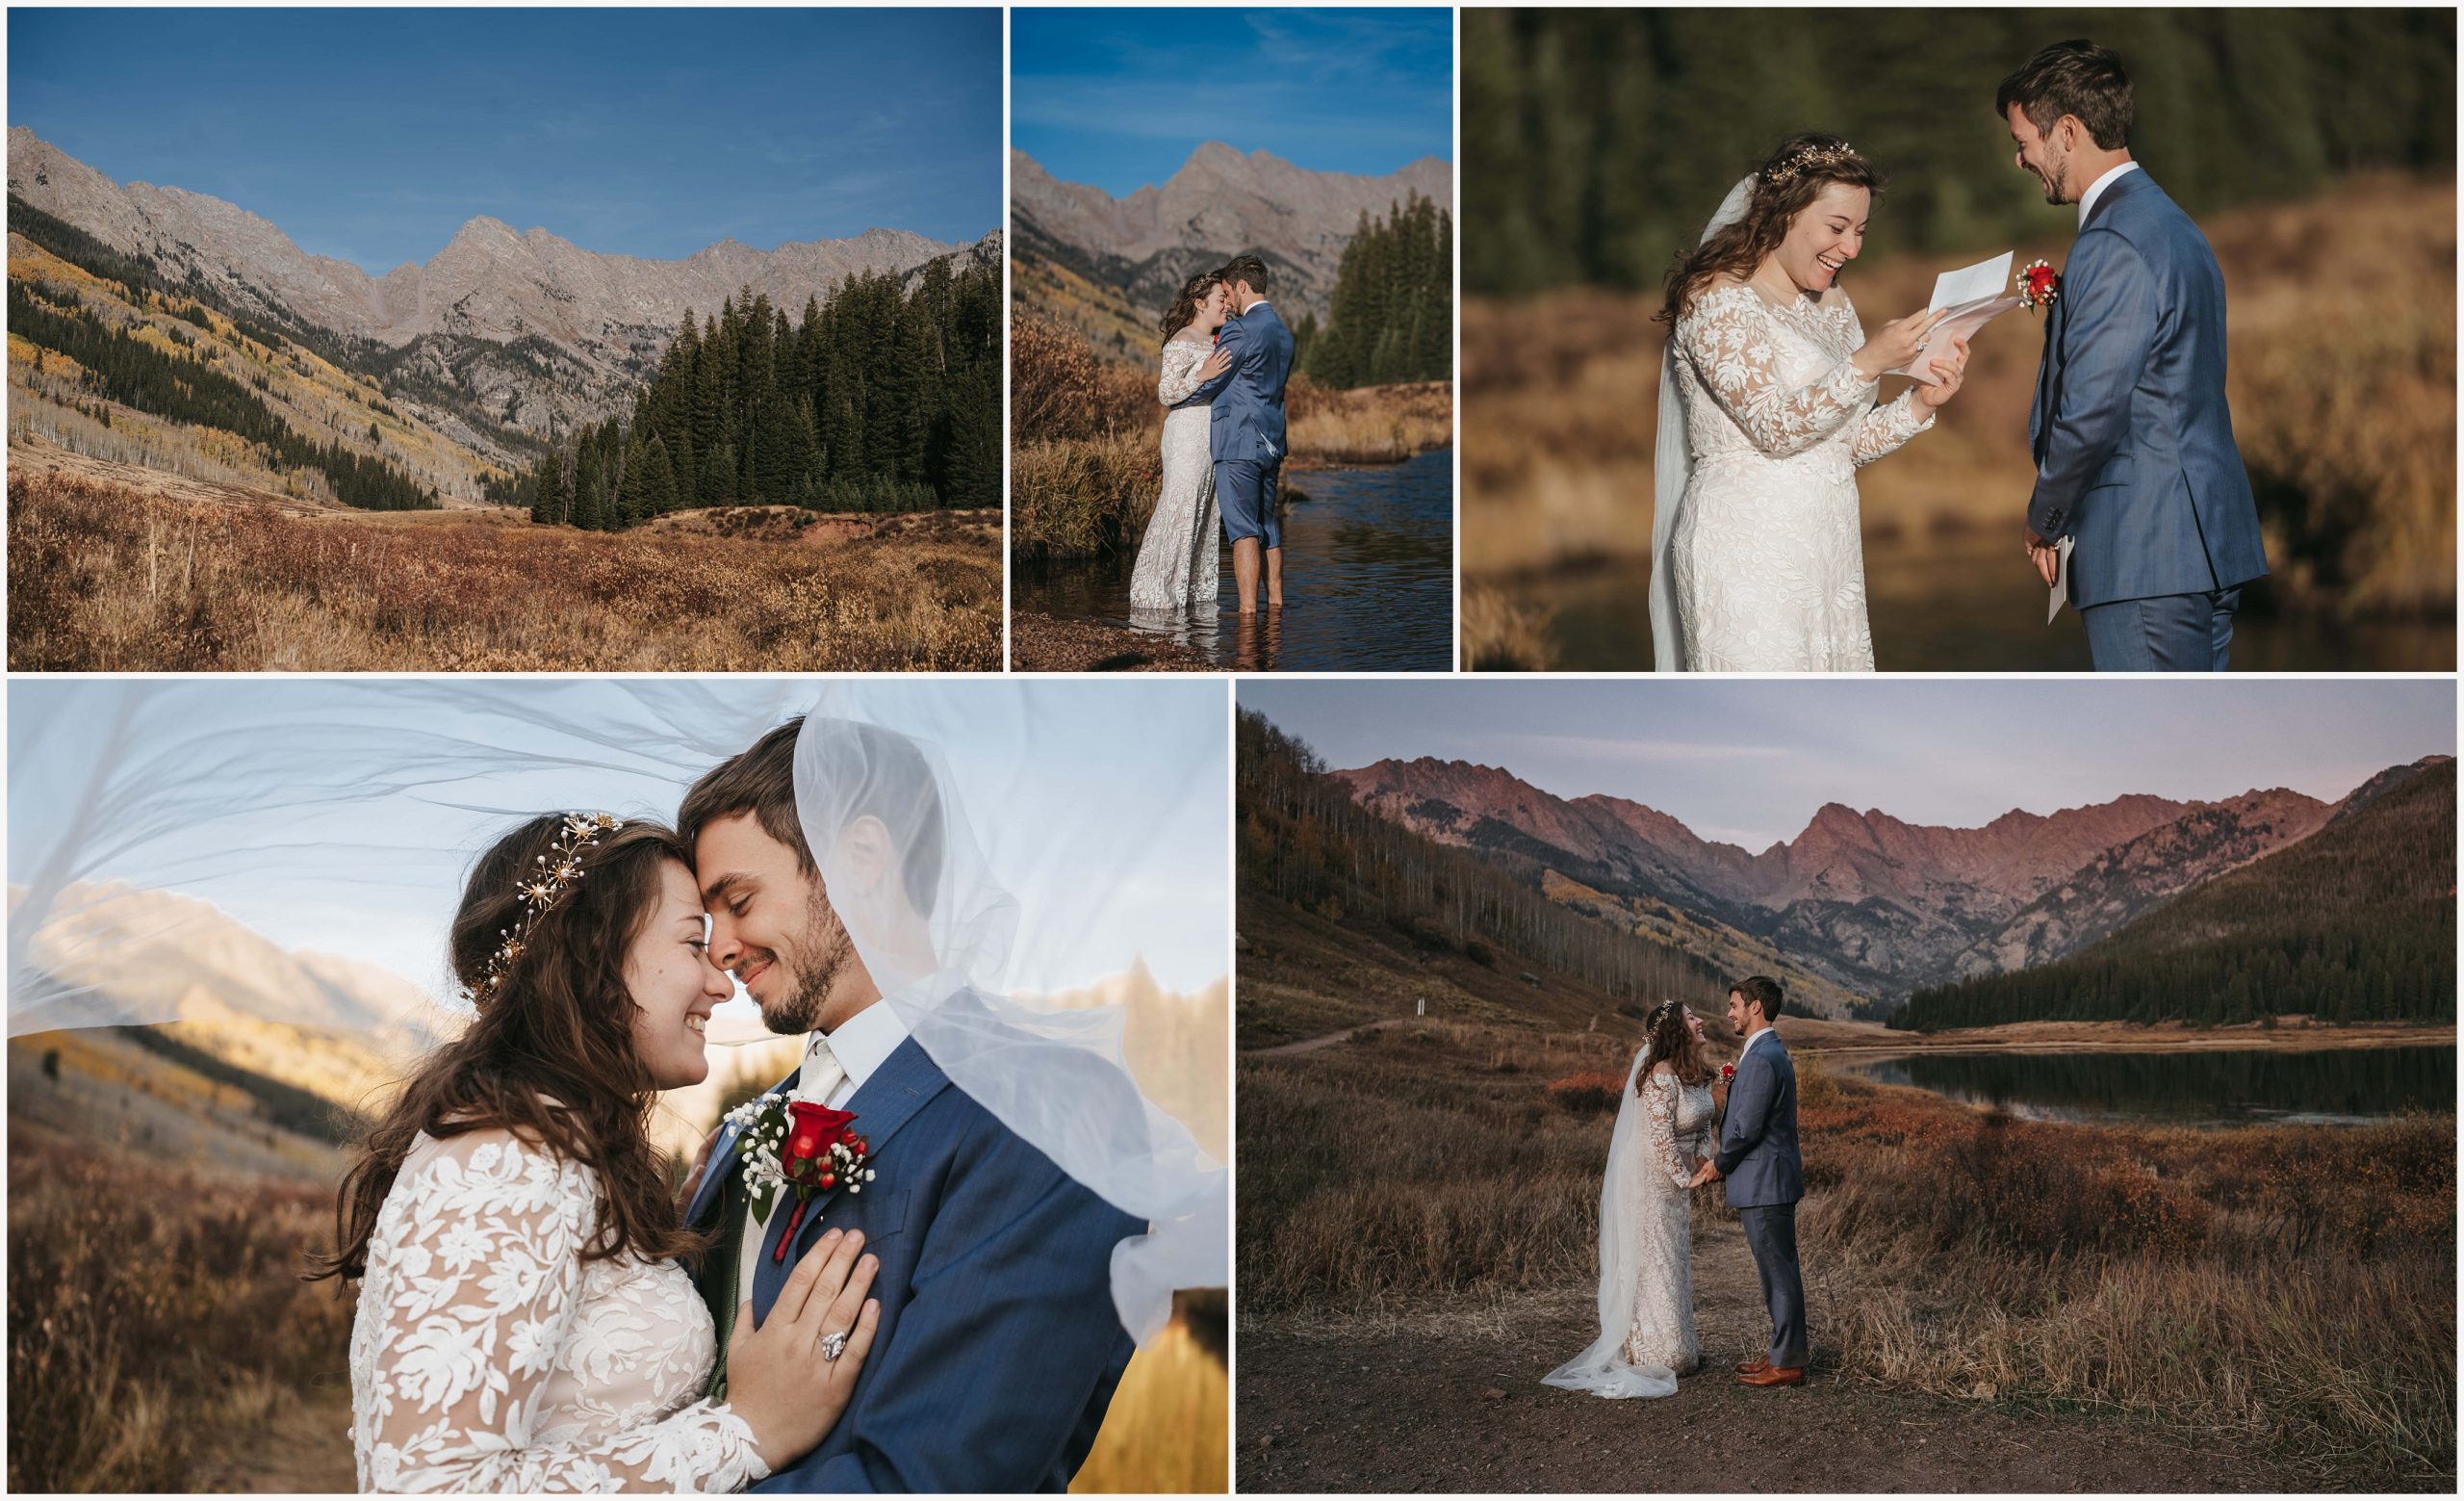 When to elope in Colorado, Best Month to Have an Outdoor Wedding in Colorado, Colorado Elopement Inspiration, Winter Colorado Elopement, Spring Colorado Elopement, Summer Colorado Elopement, Fall Colorado Elopement, best month to elope in Colorado, the best time to elope in Colorado, fall elopement